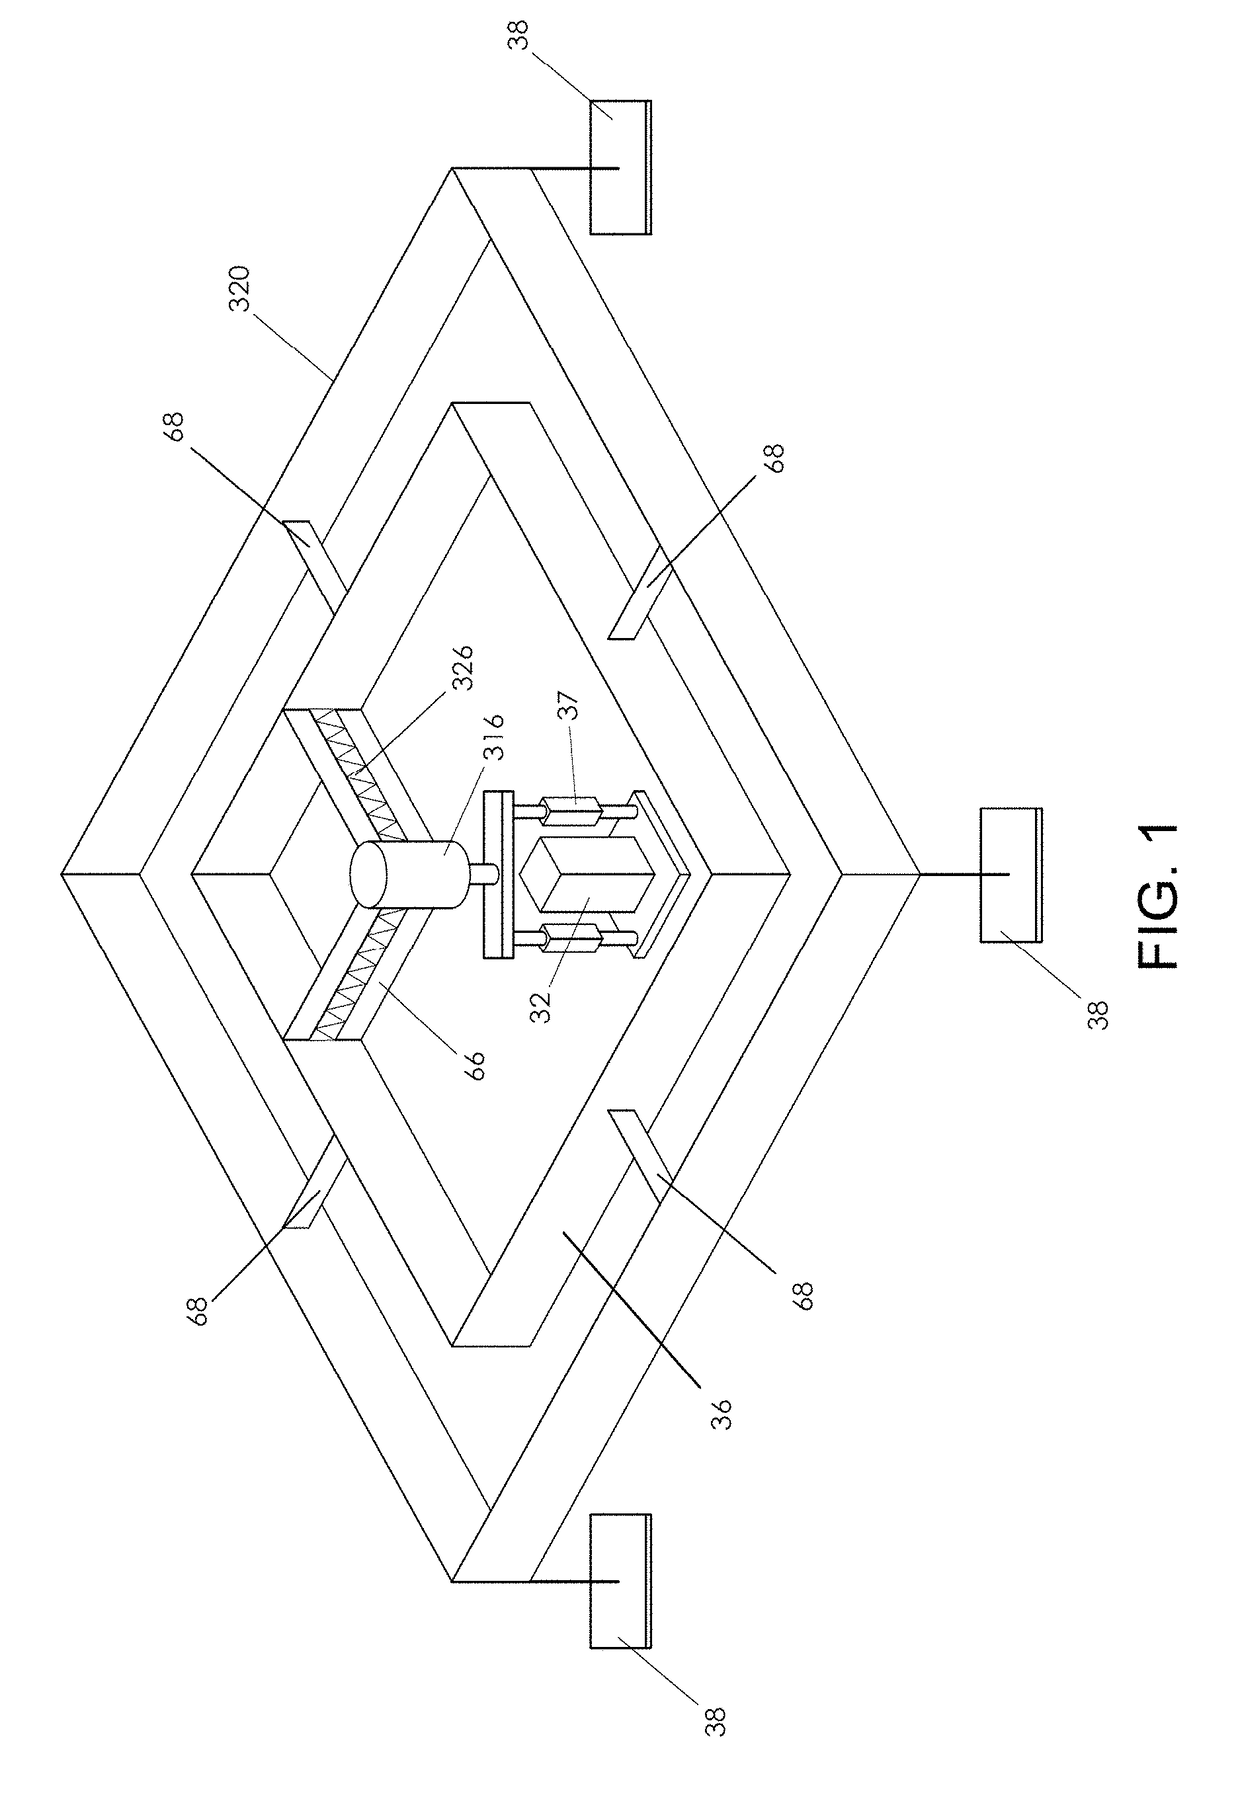 Contact mechanic tests using stylus alignment to probe material properties